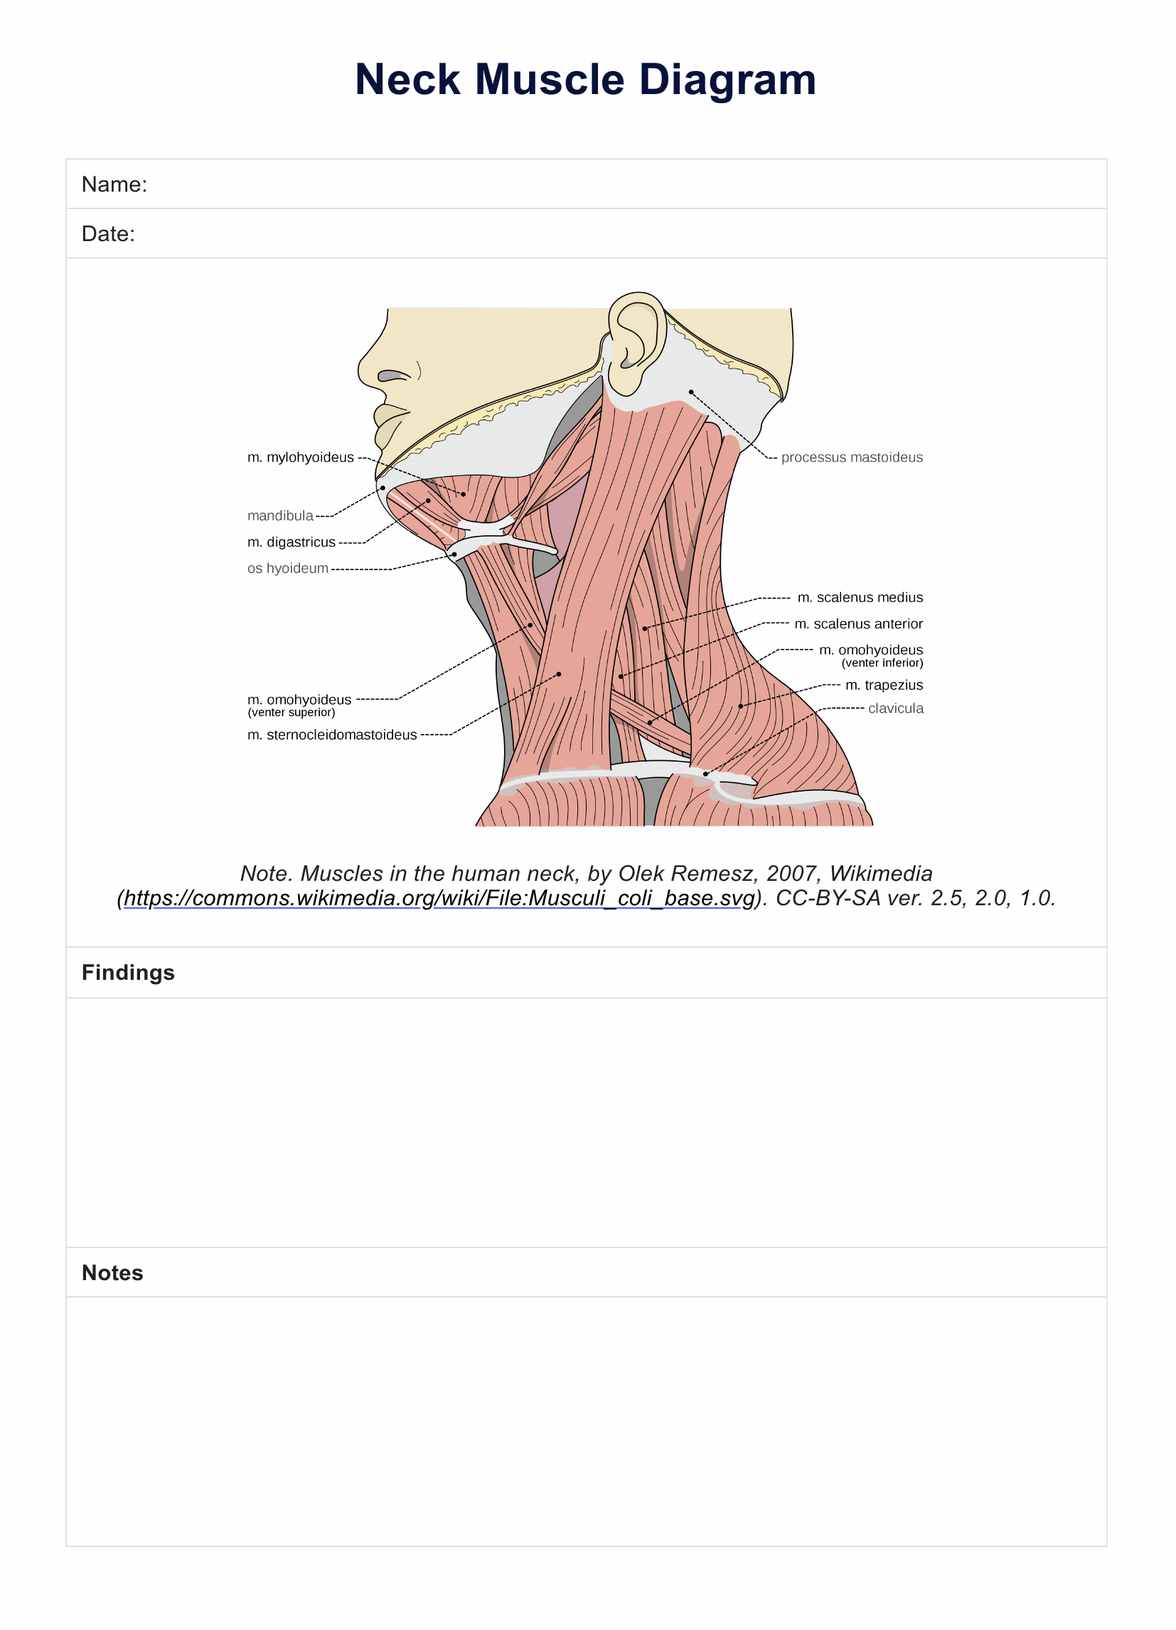 Neck Muscle Diagram PDF Example